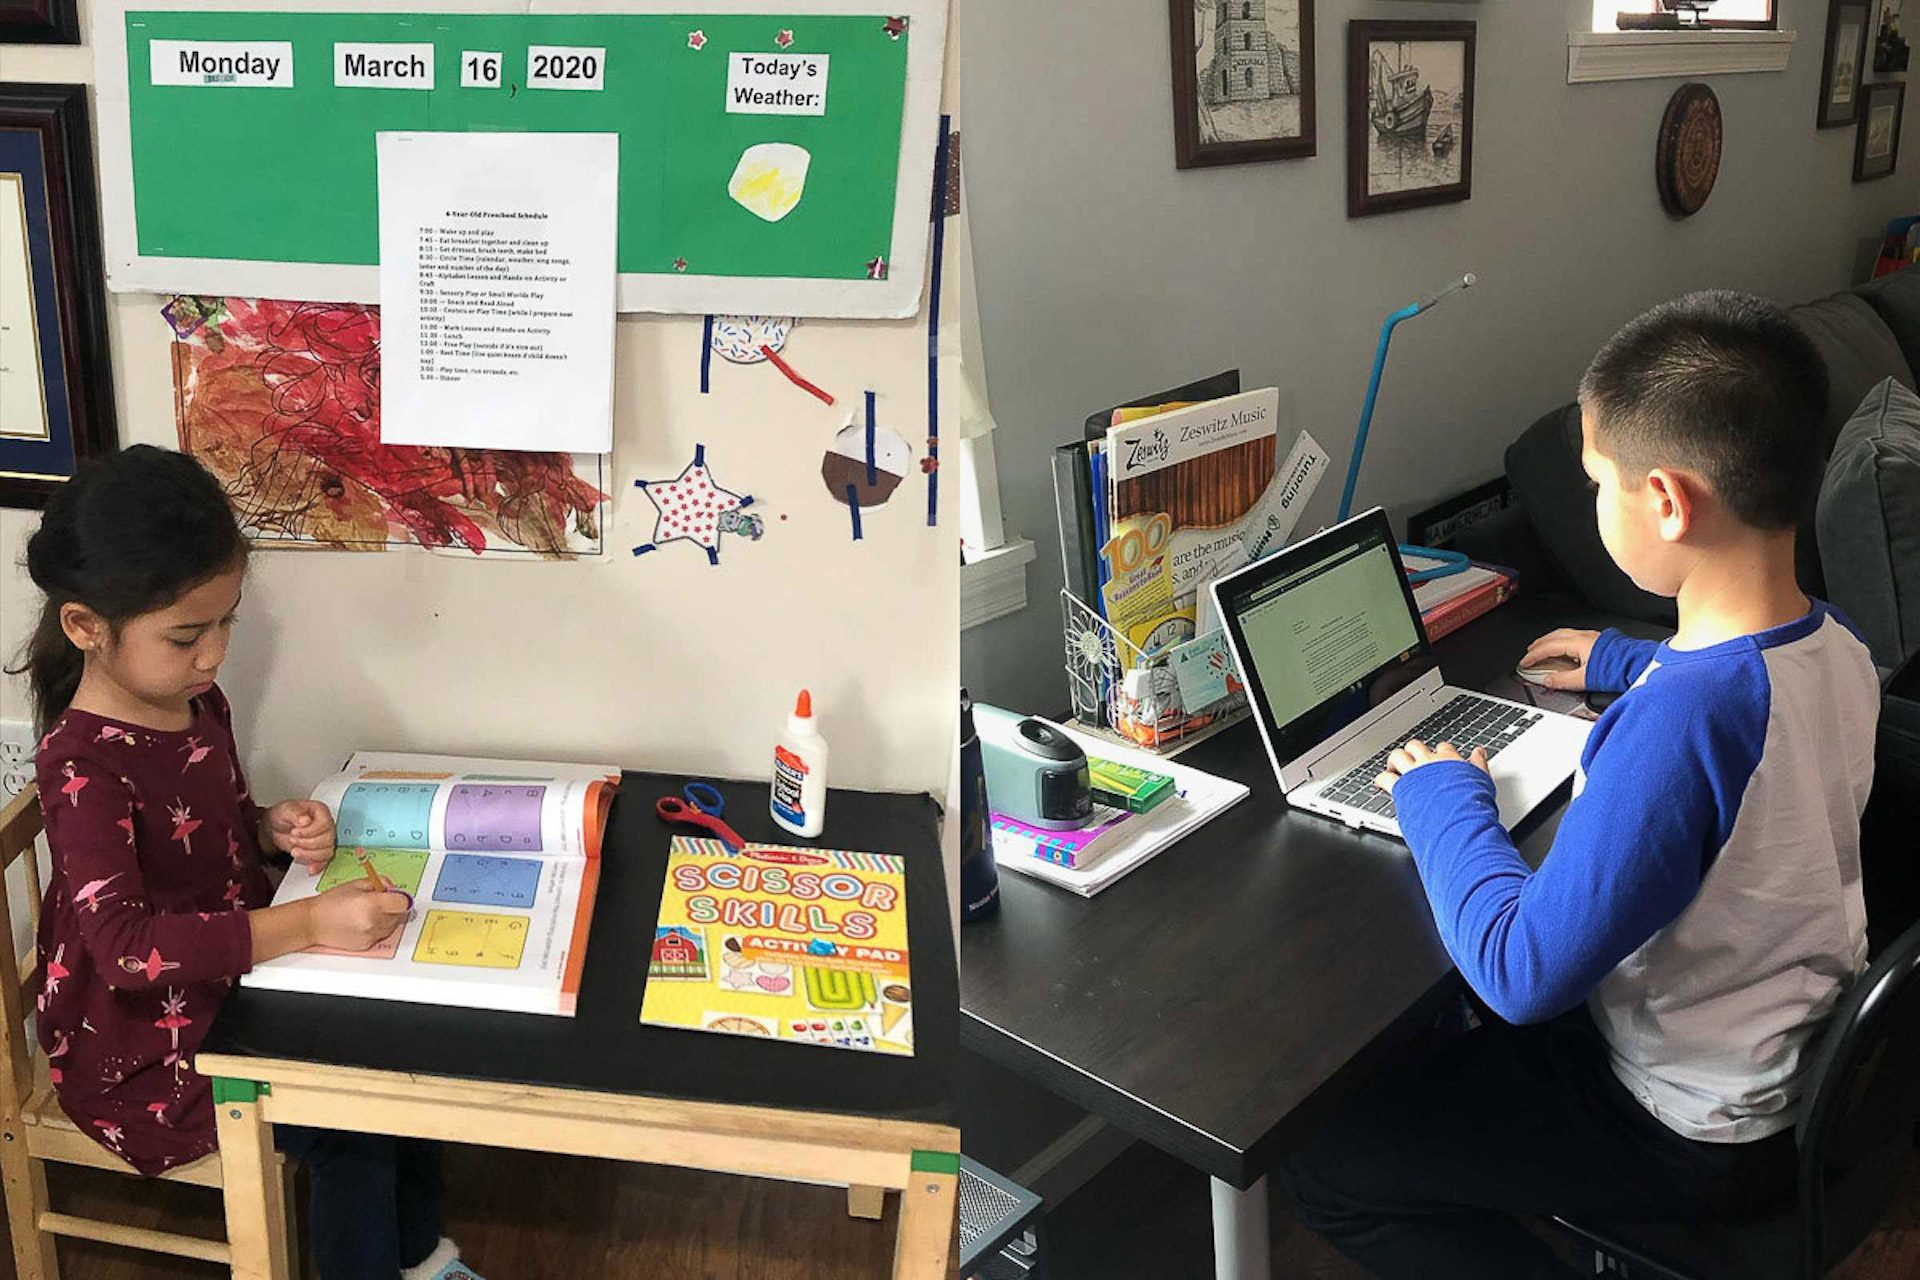 Katherine Young made her children their own workspaces and schedules while they’re off from school.